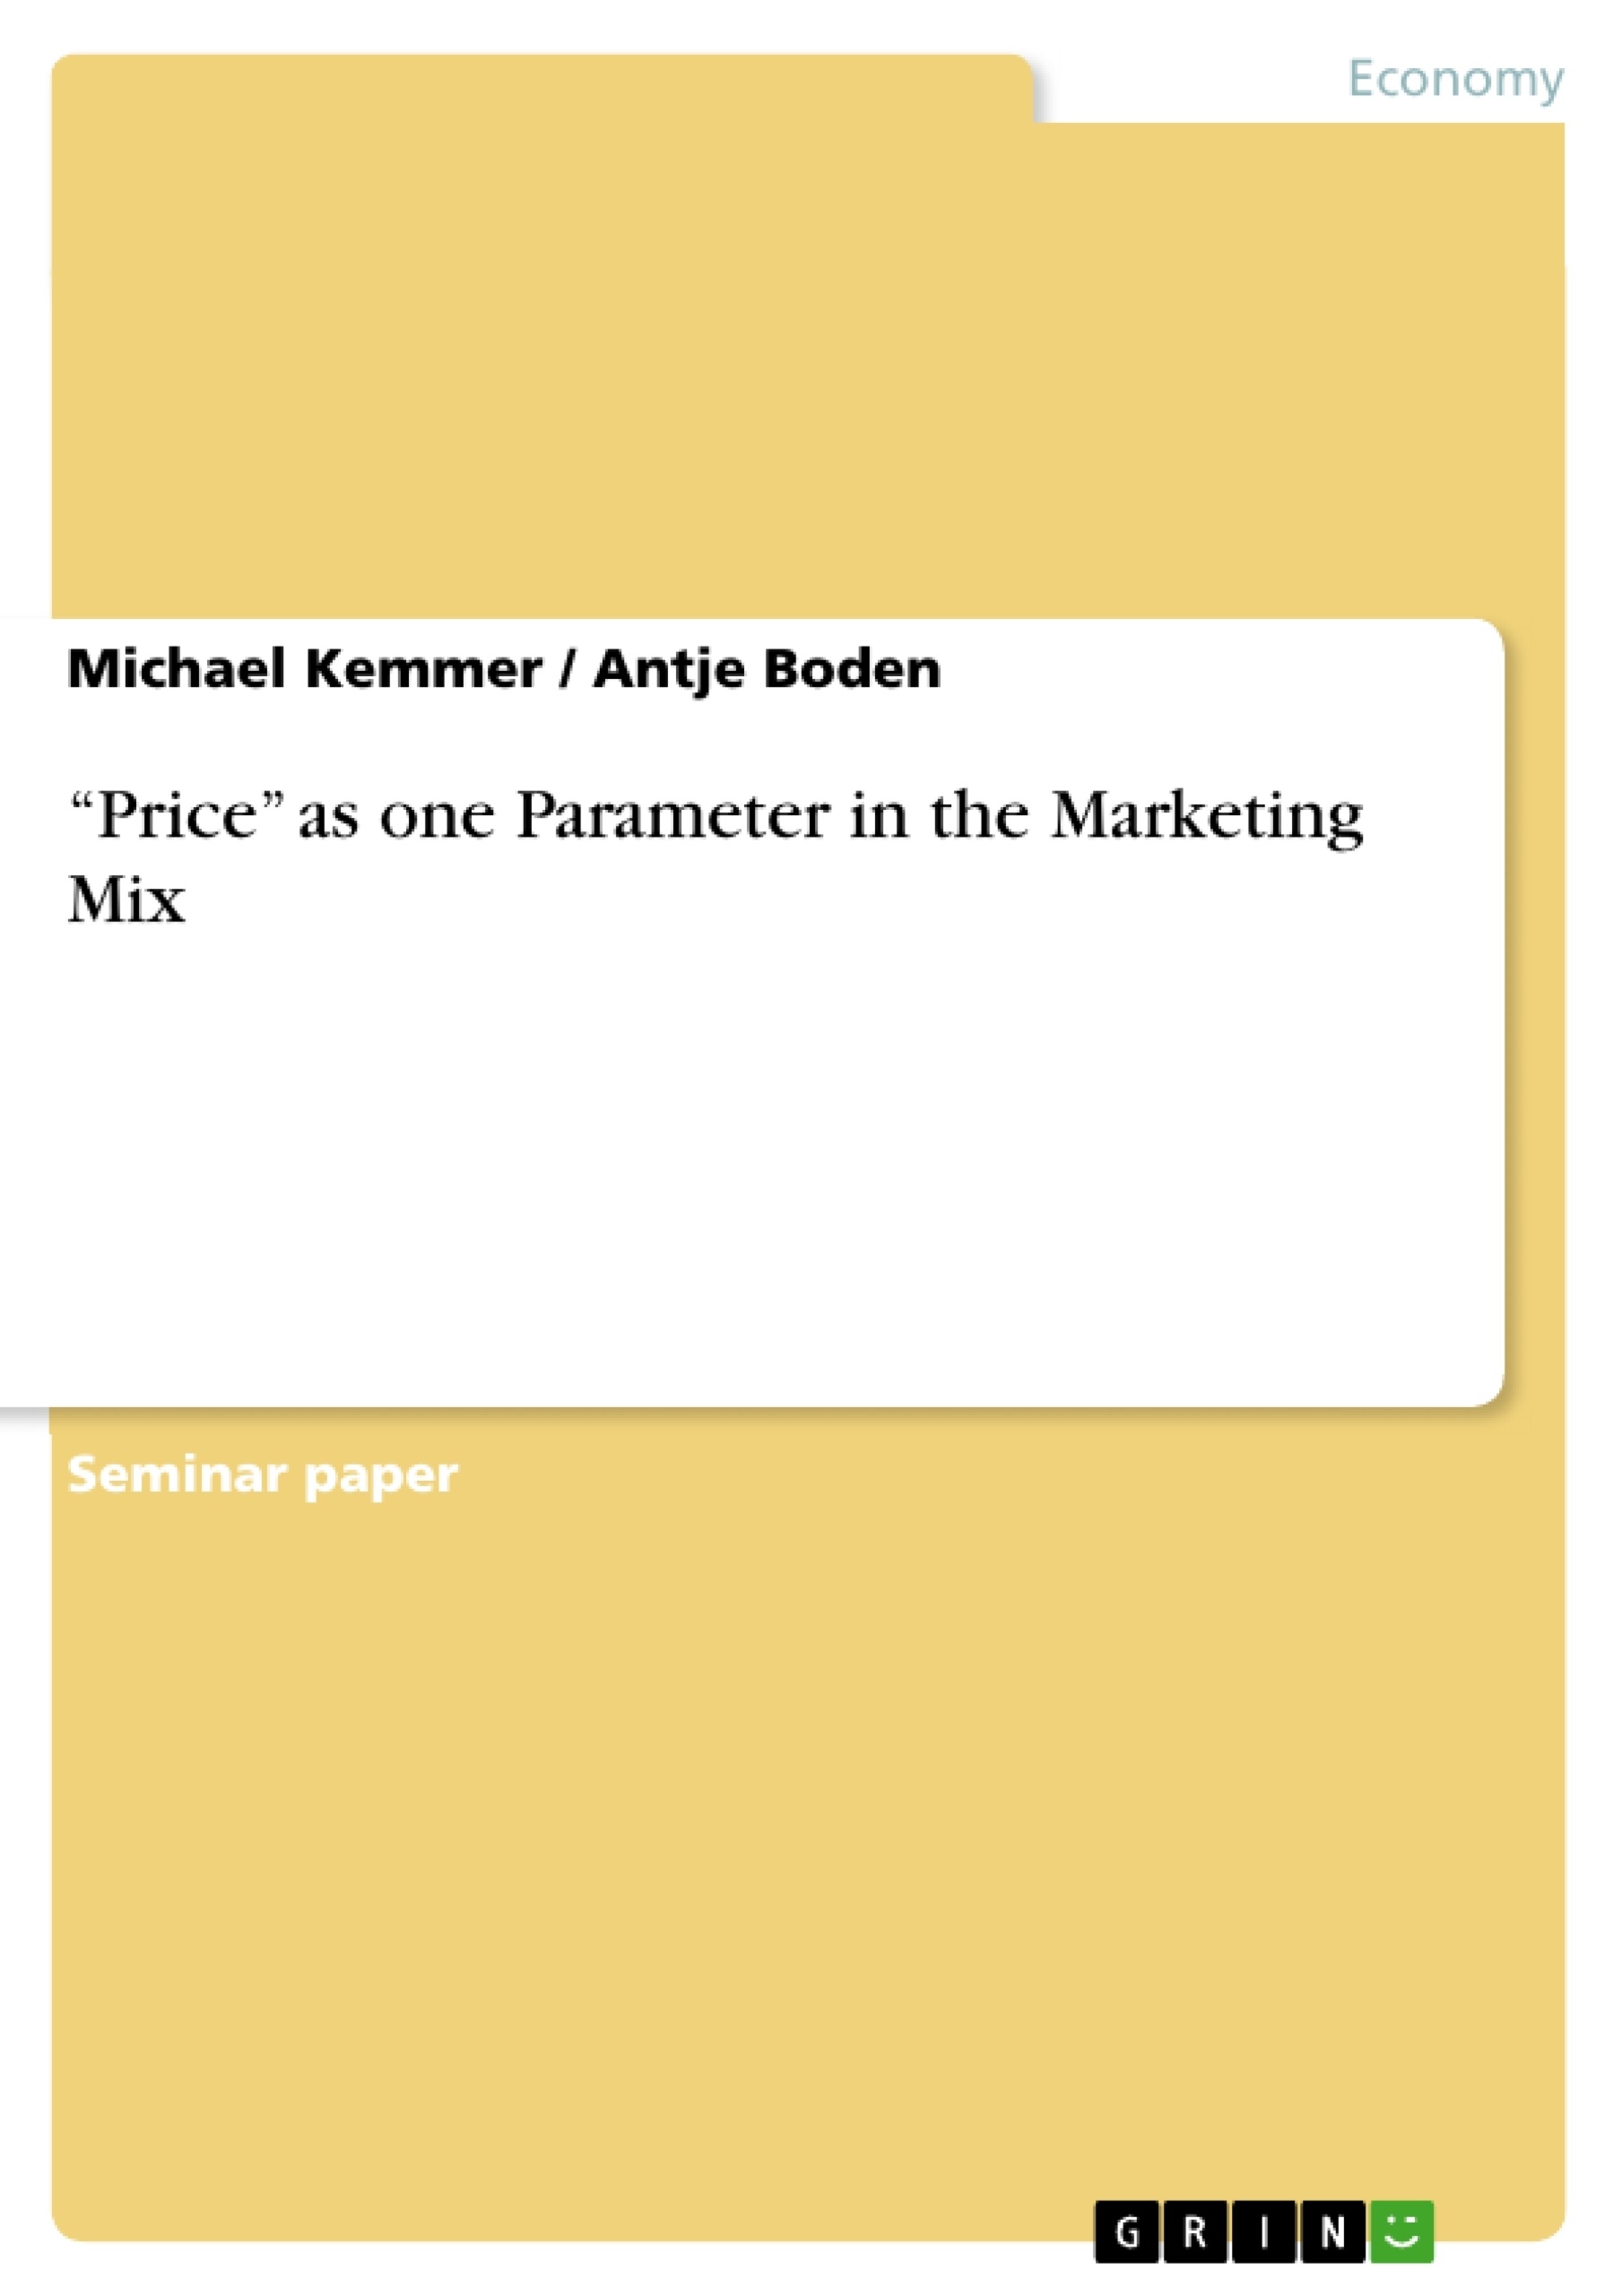 Title: “Price” as one Parameter in the Marketing Mix